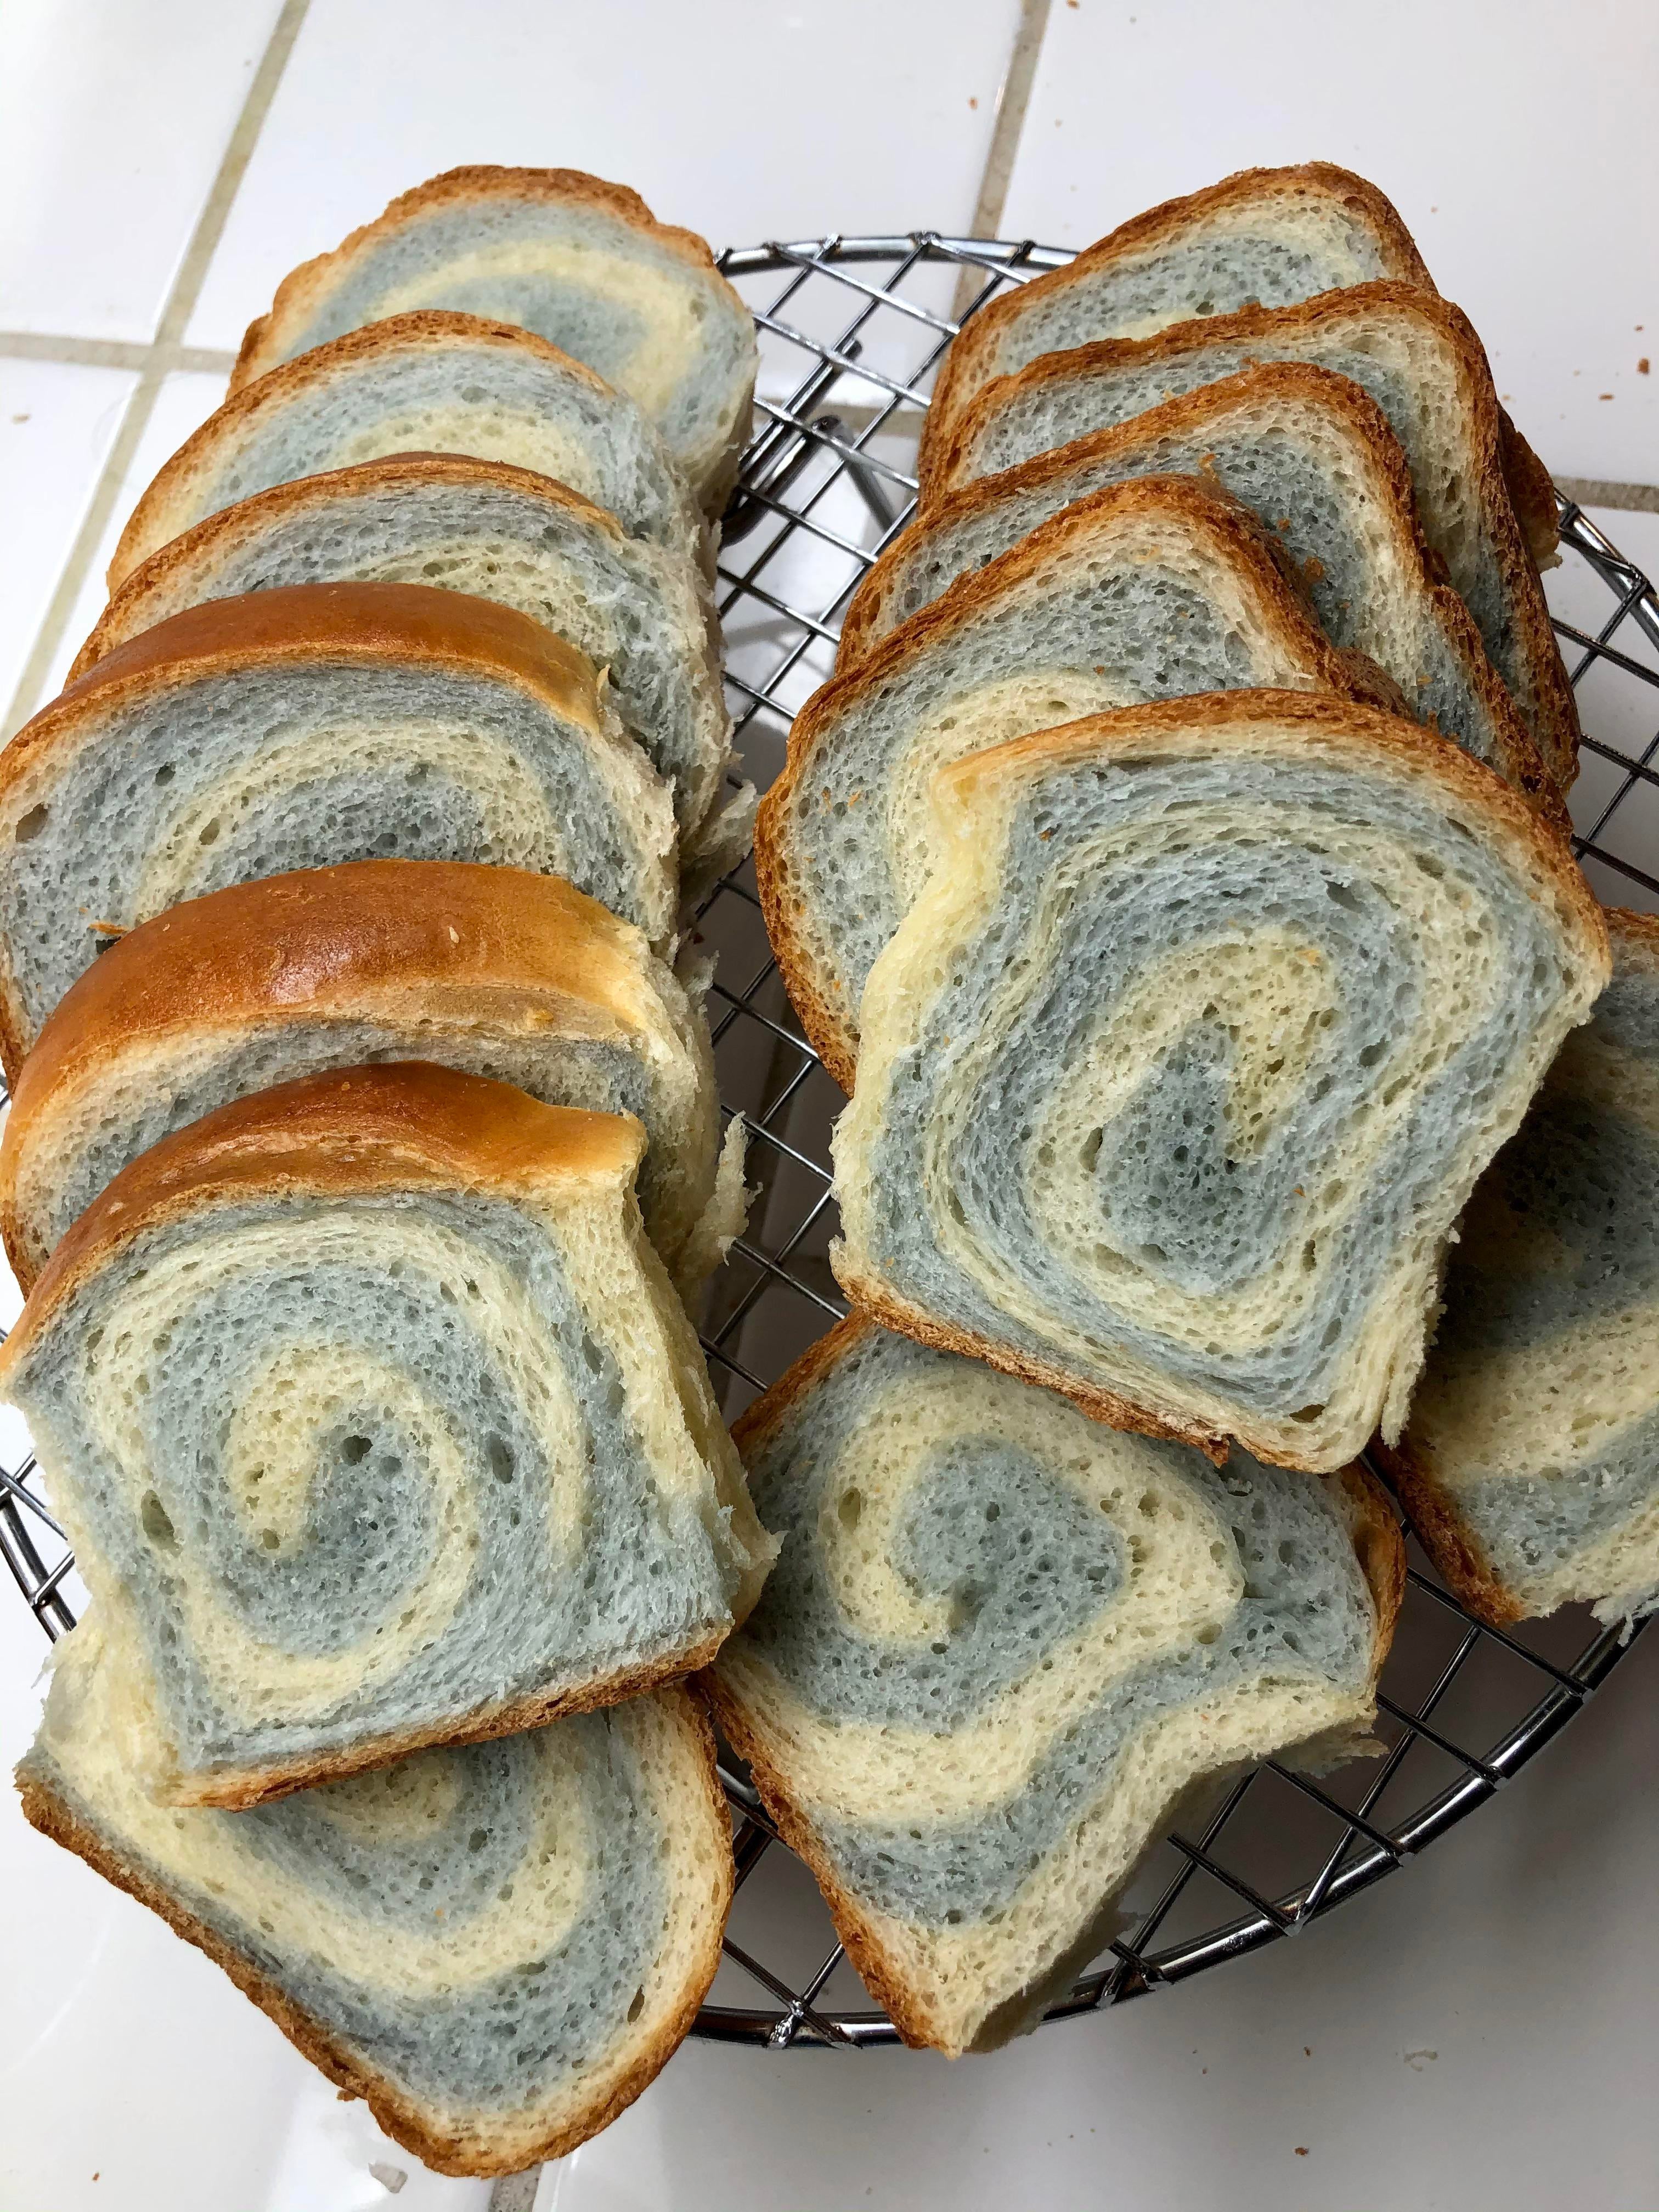 I Made Some Blue Butterfly Pea Powder Swirled Milk Bread Yesterday Some Friends Said It Looks A Bit Moldy Blue But I Still Think It Looks Super Cool Regardless Dining And